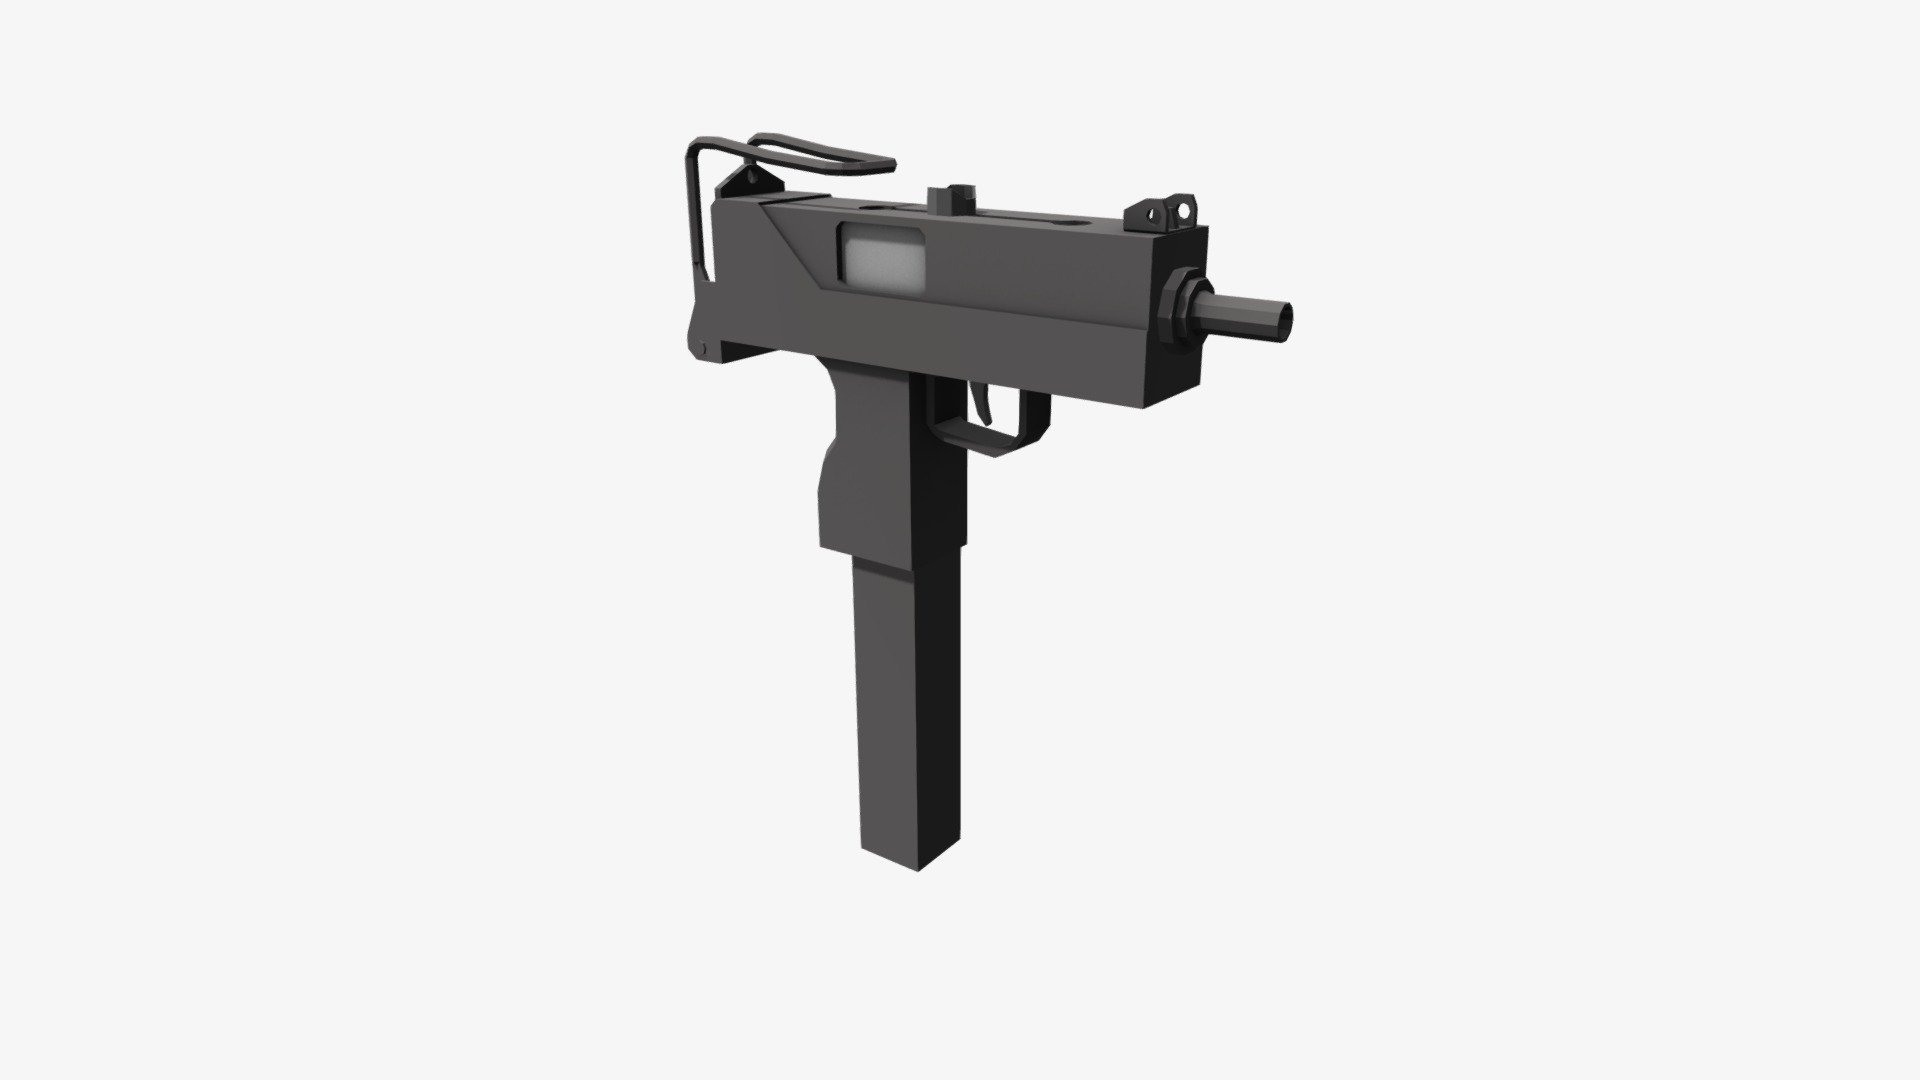 Low Poly Mac 10 - 3D model by samanthacford [07b8235] - Sketchfab